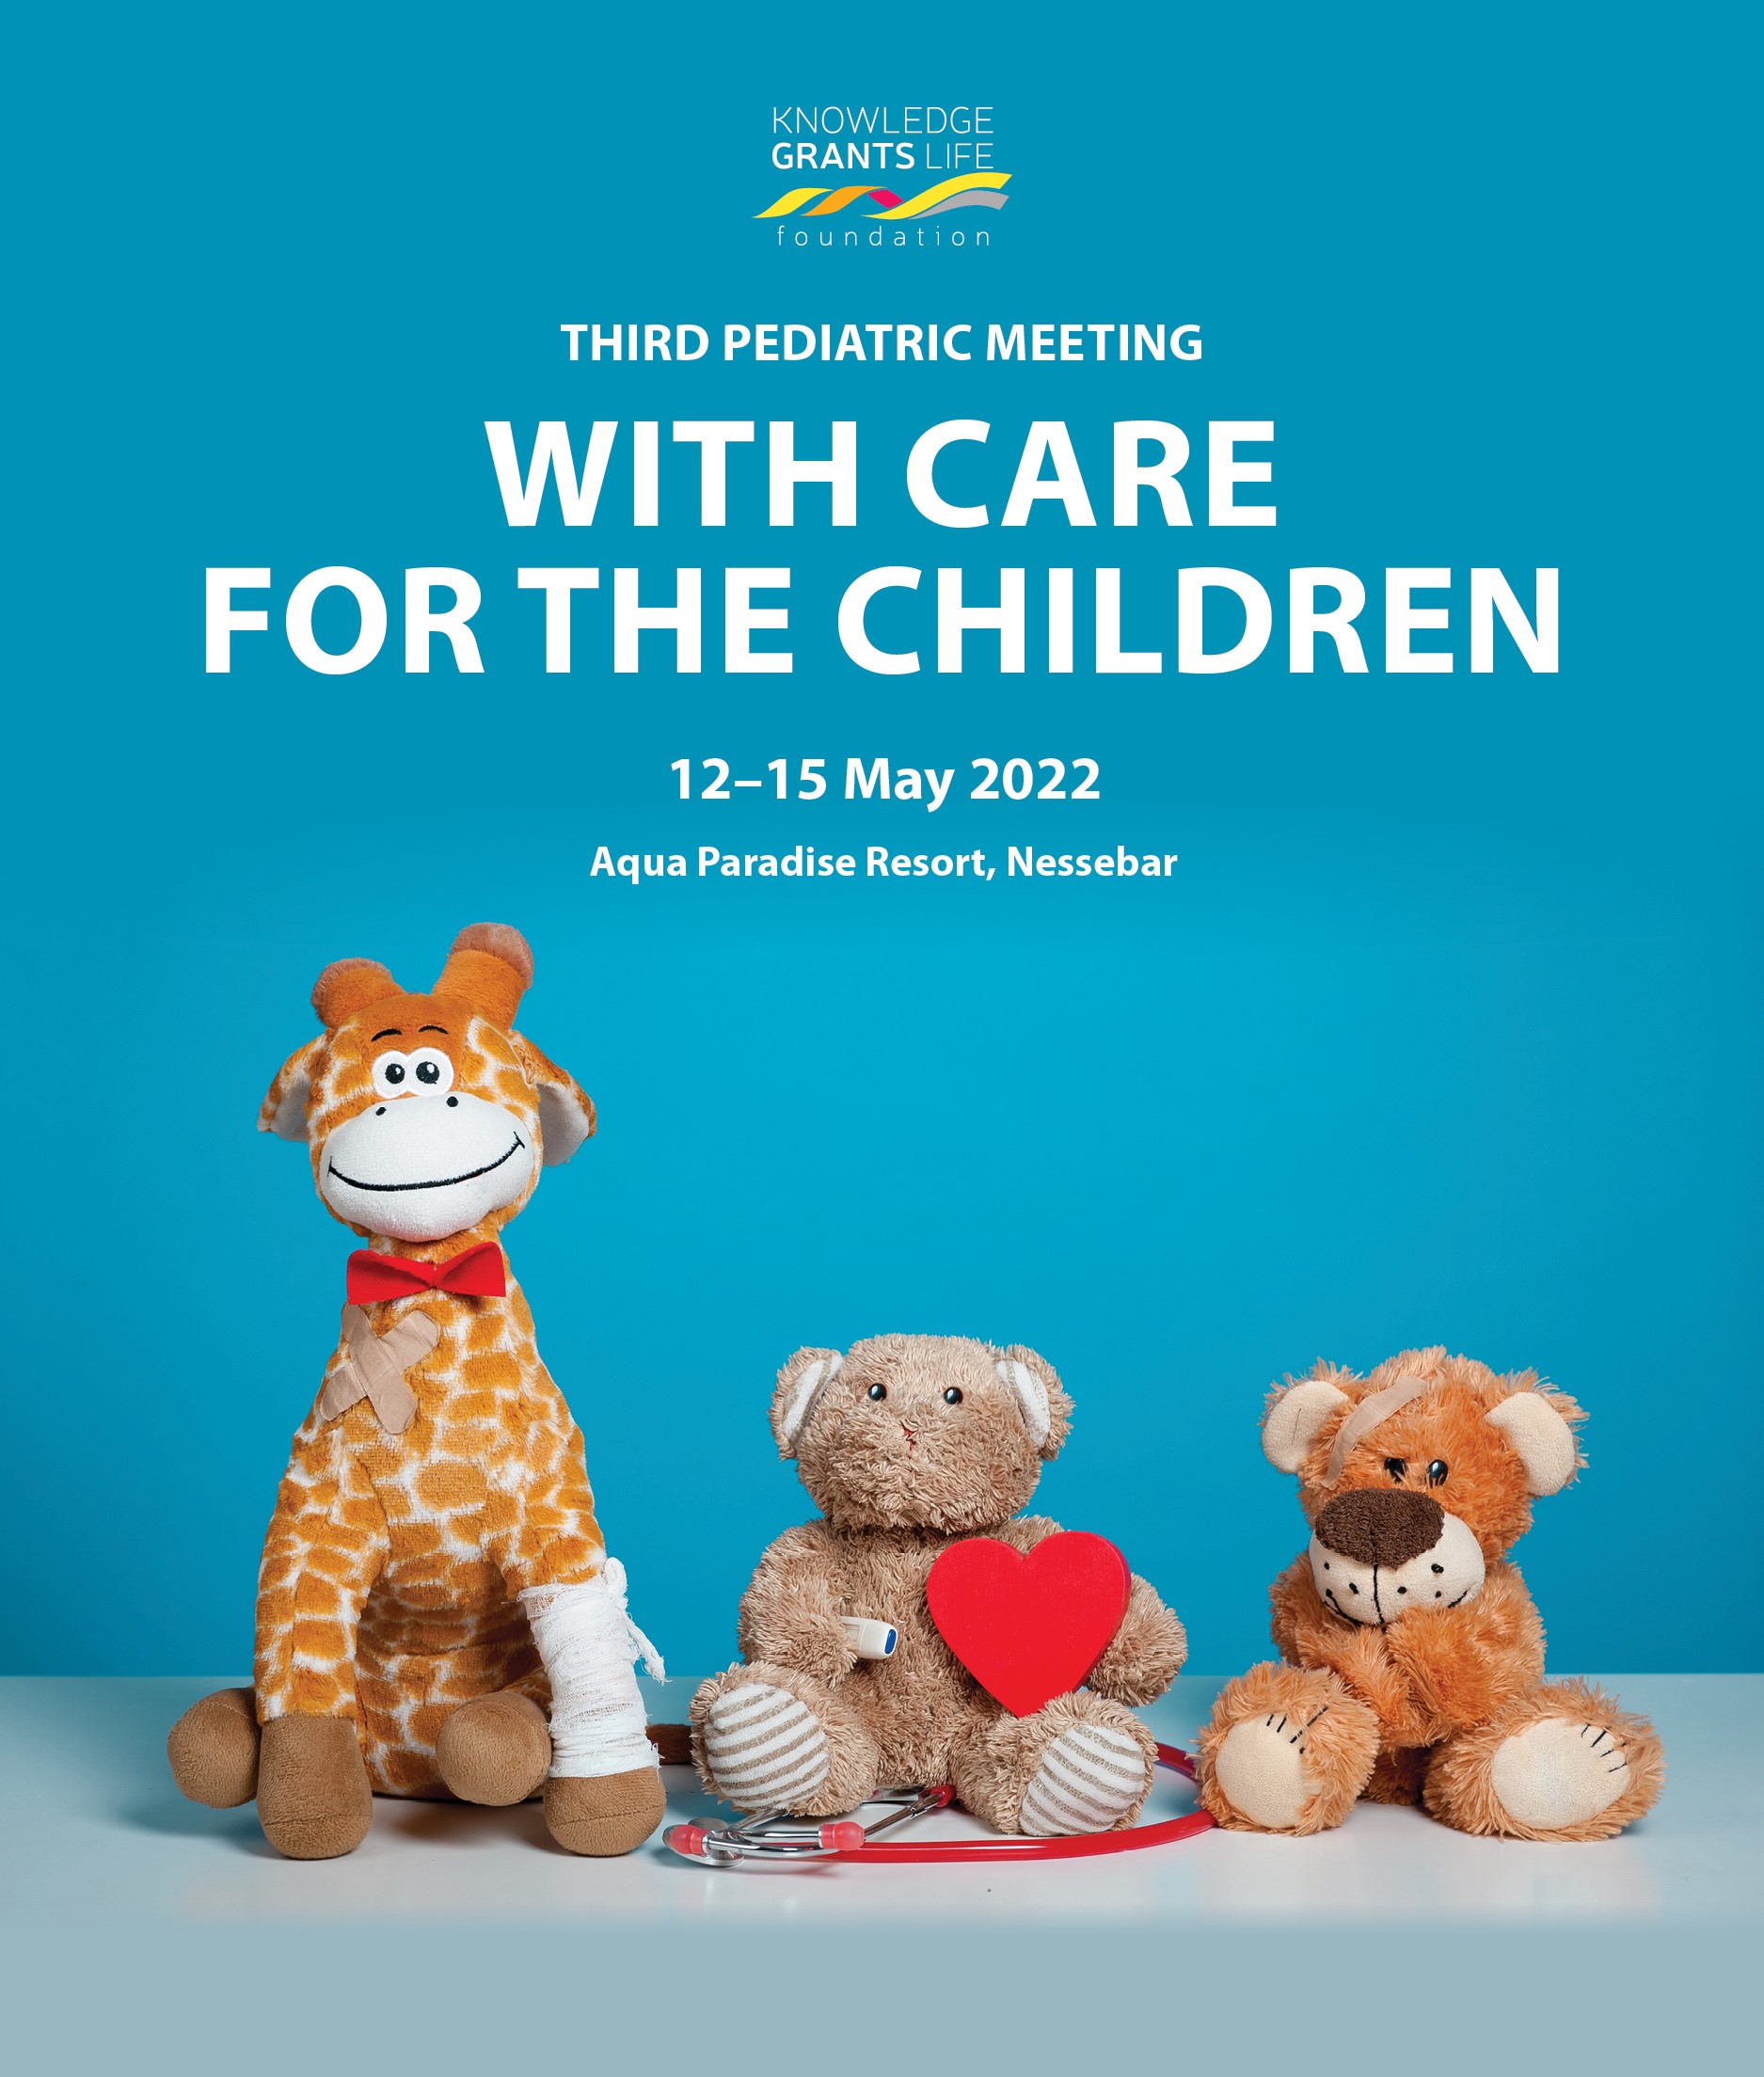 Third pediatric meeting "With care for the children"